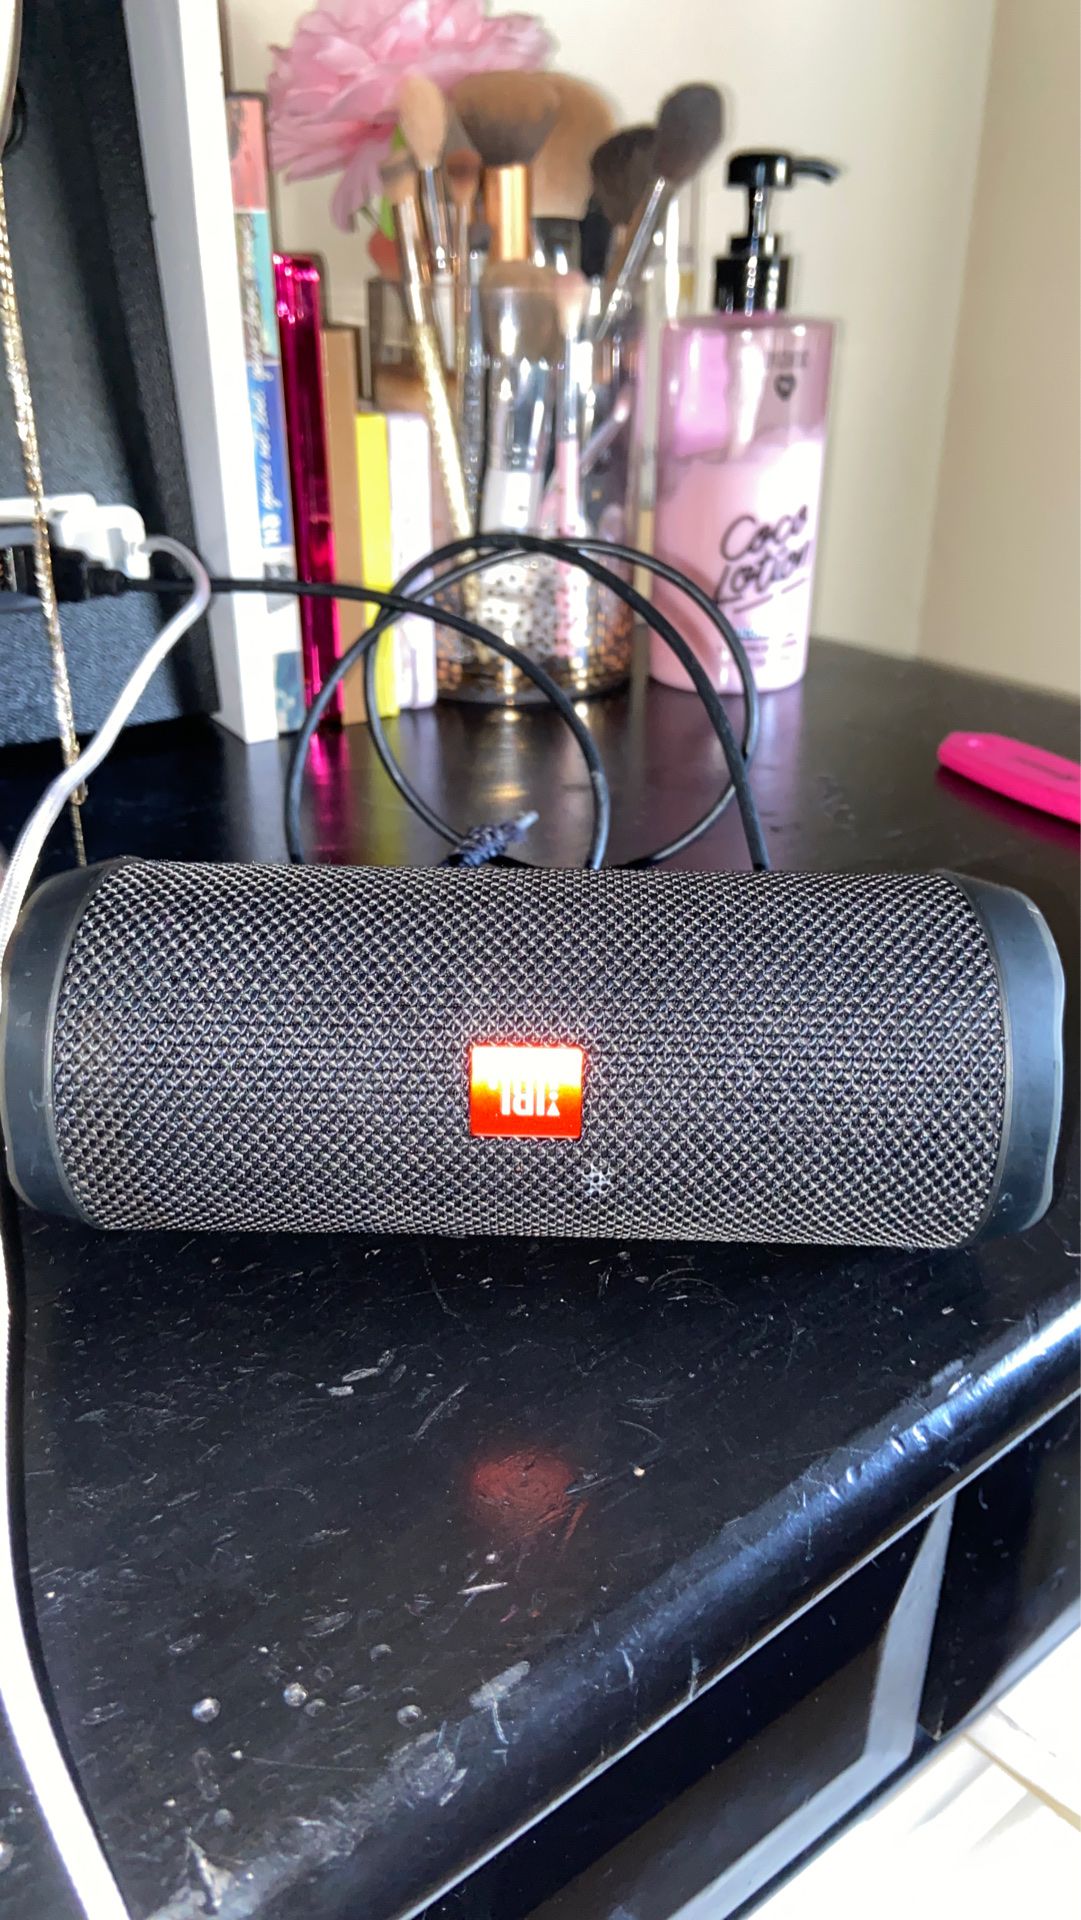 JBL speaker with charger